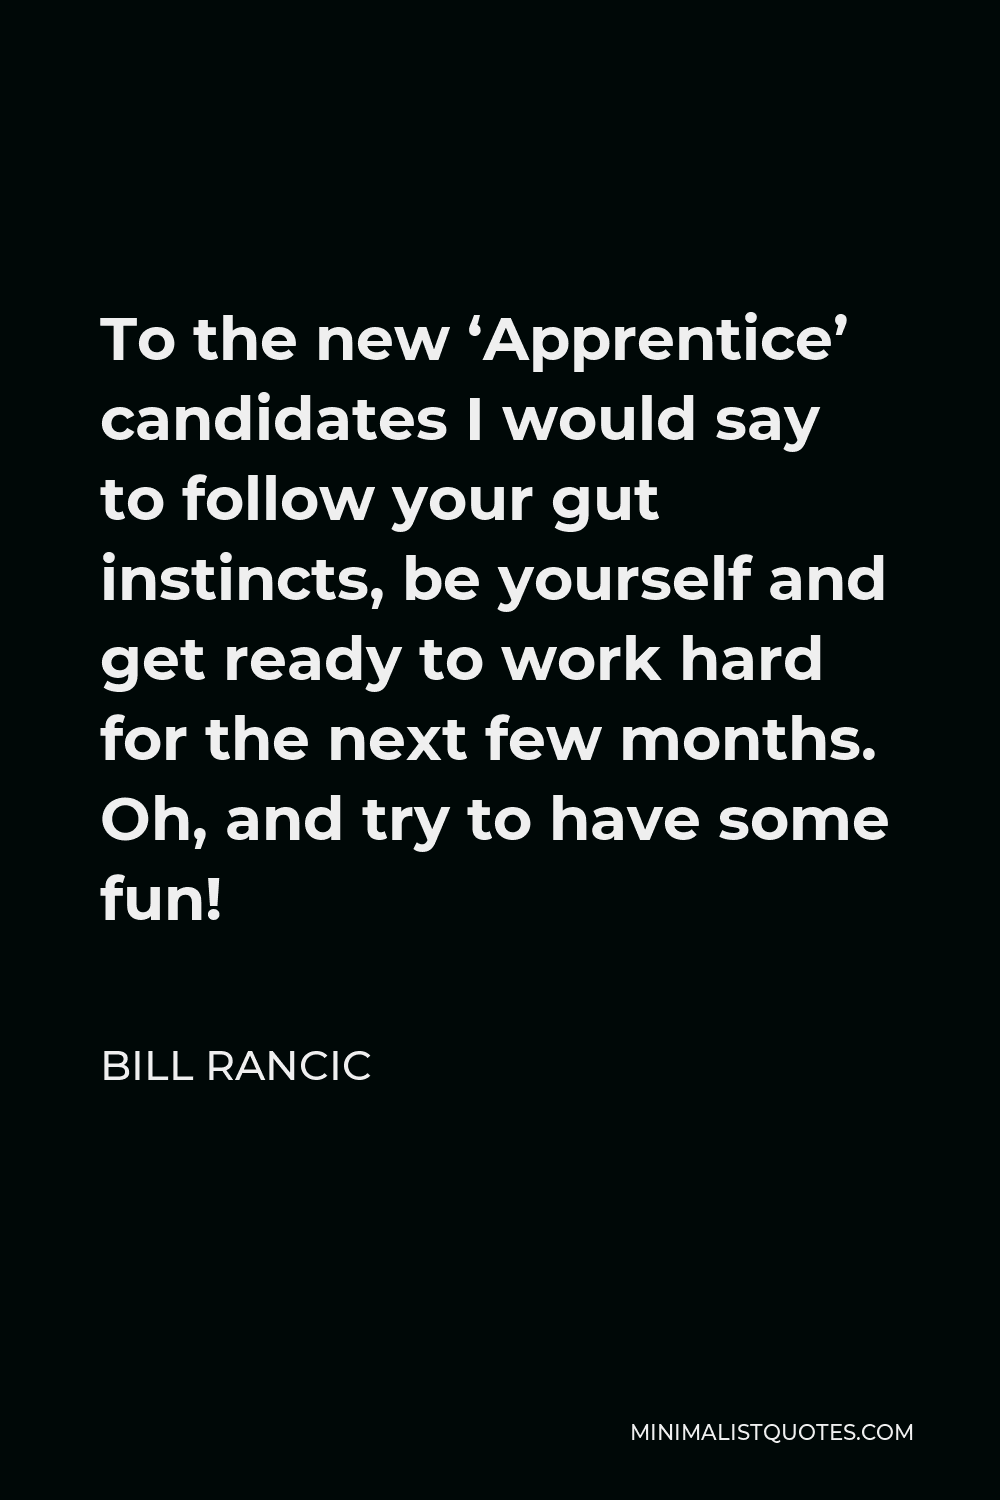 Bill Rancic Quote - To the new ‘Apprentice’ candidates I would say to follow your gut instincts, be yourself and get ready to work hard for the next few months. Oh, and try to have some fun!